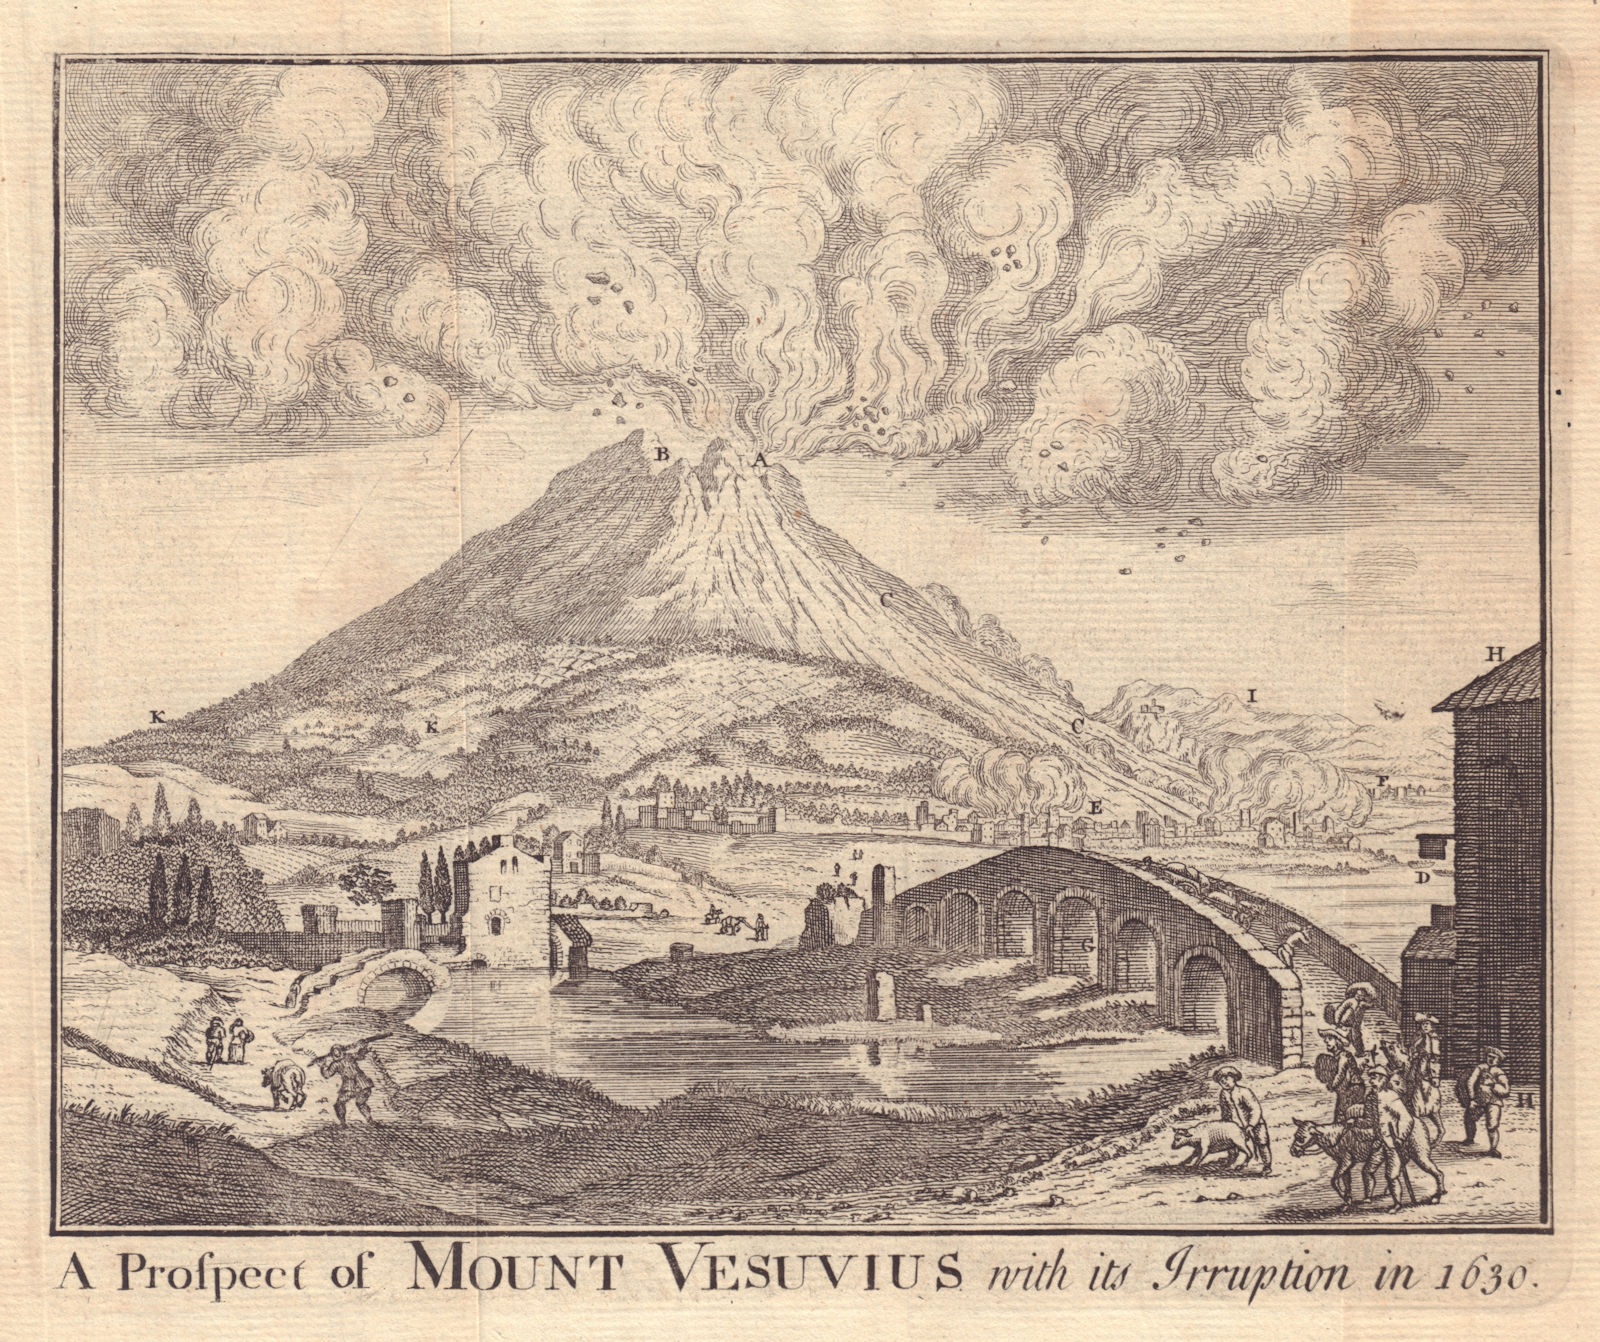 Prospect of Mount Vesuvius with its Irruption in 1630. Eruption 1750 old print